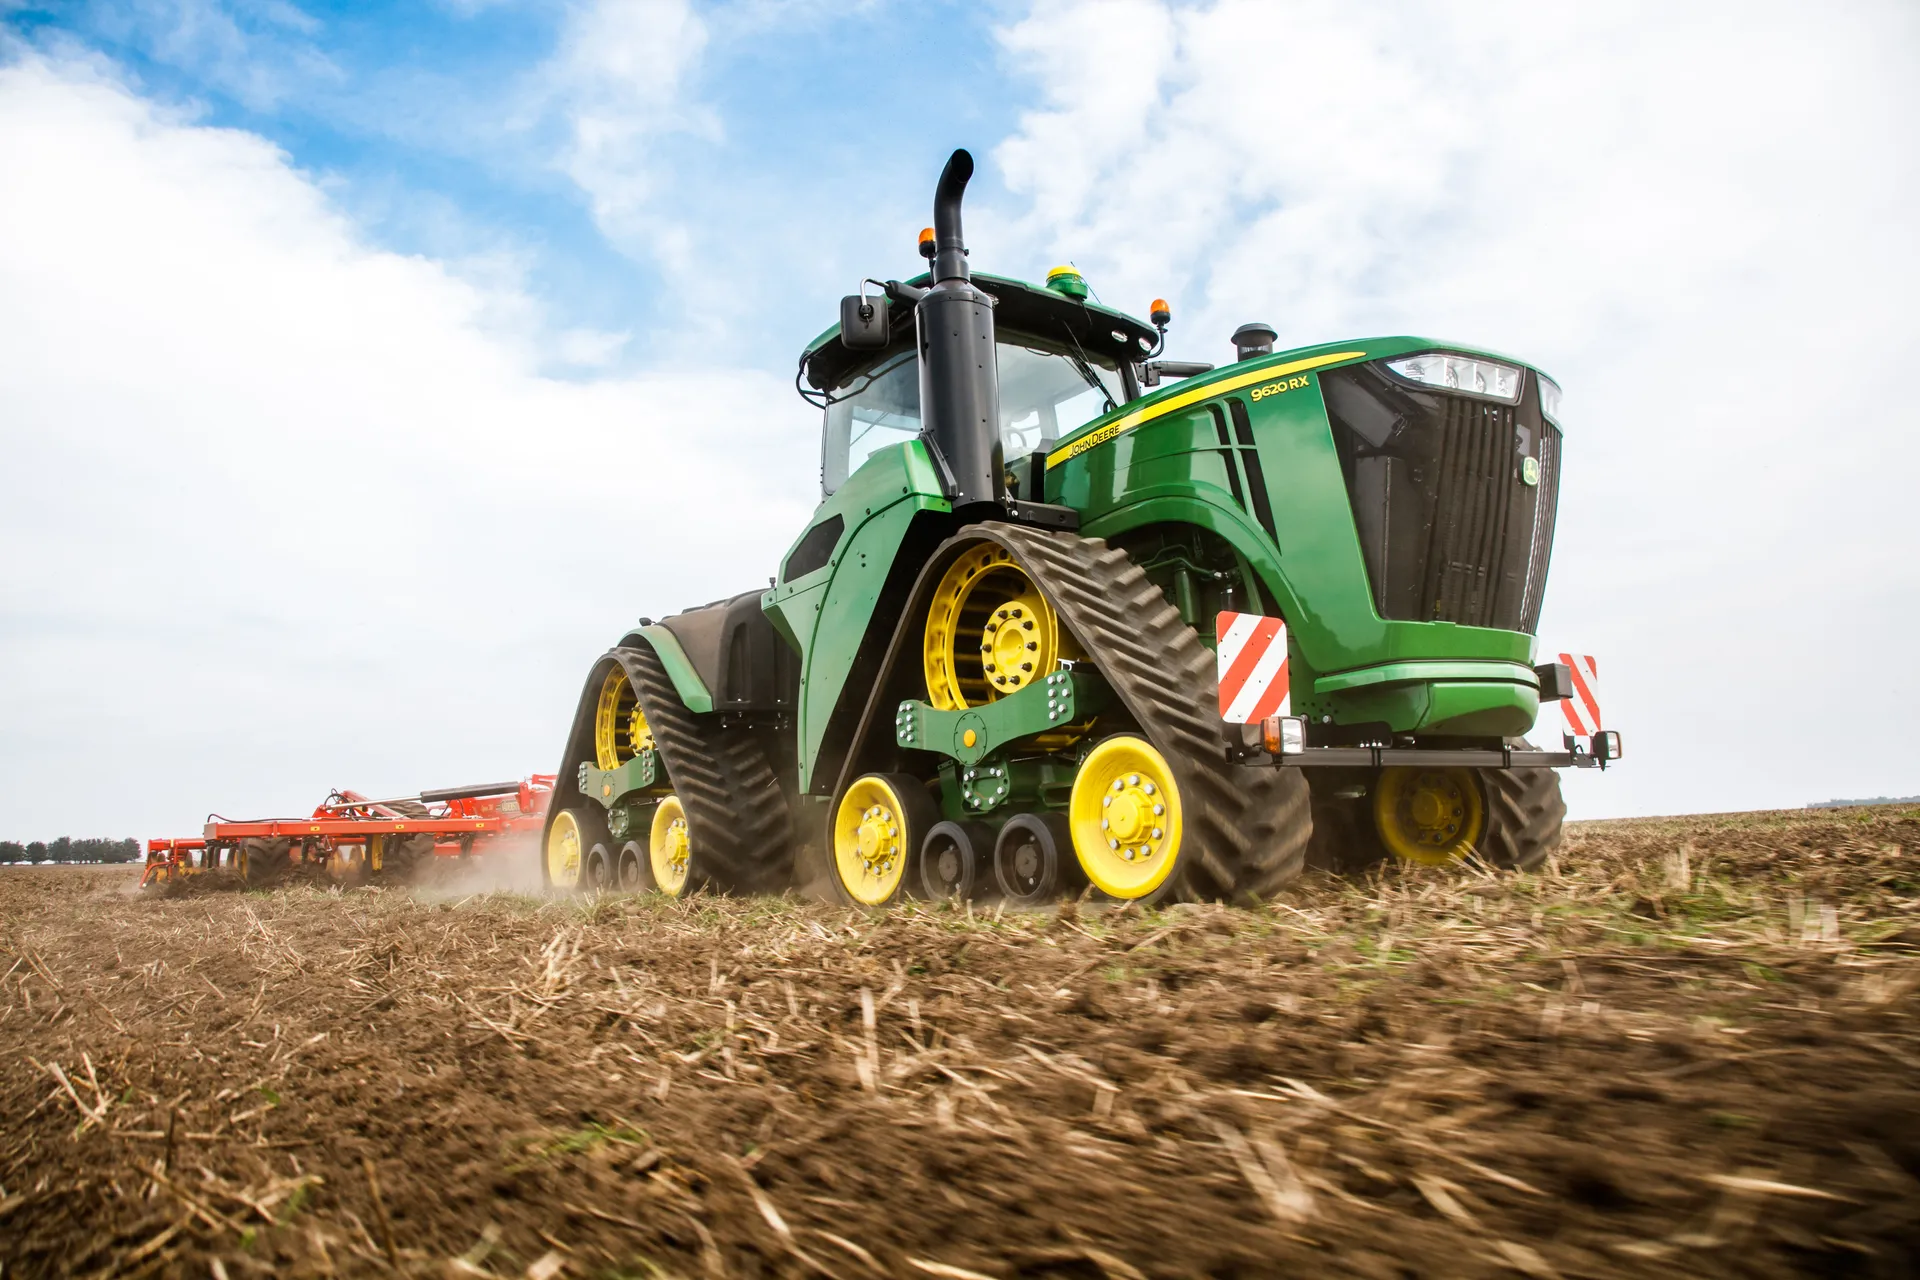 How to Choose the Right Tractors Blue Book?